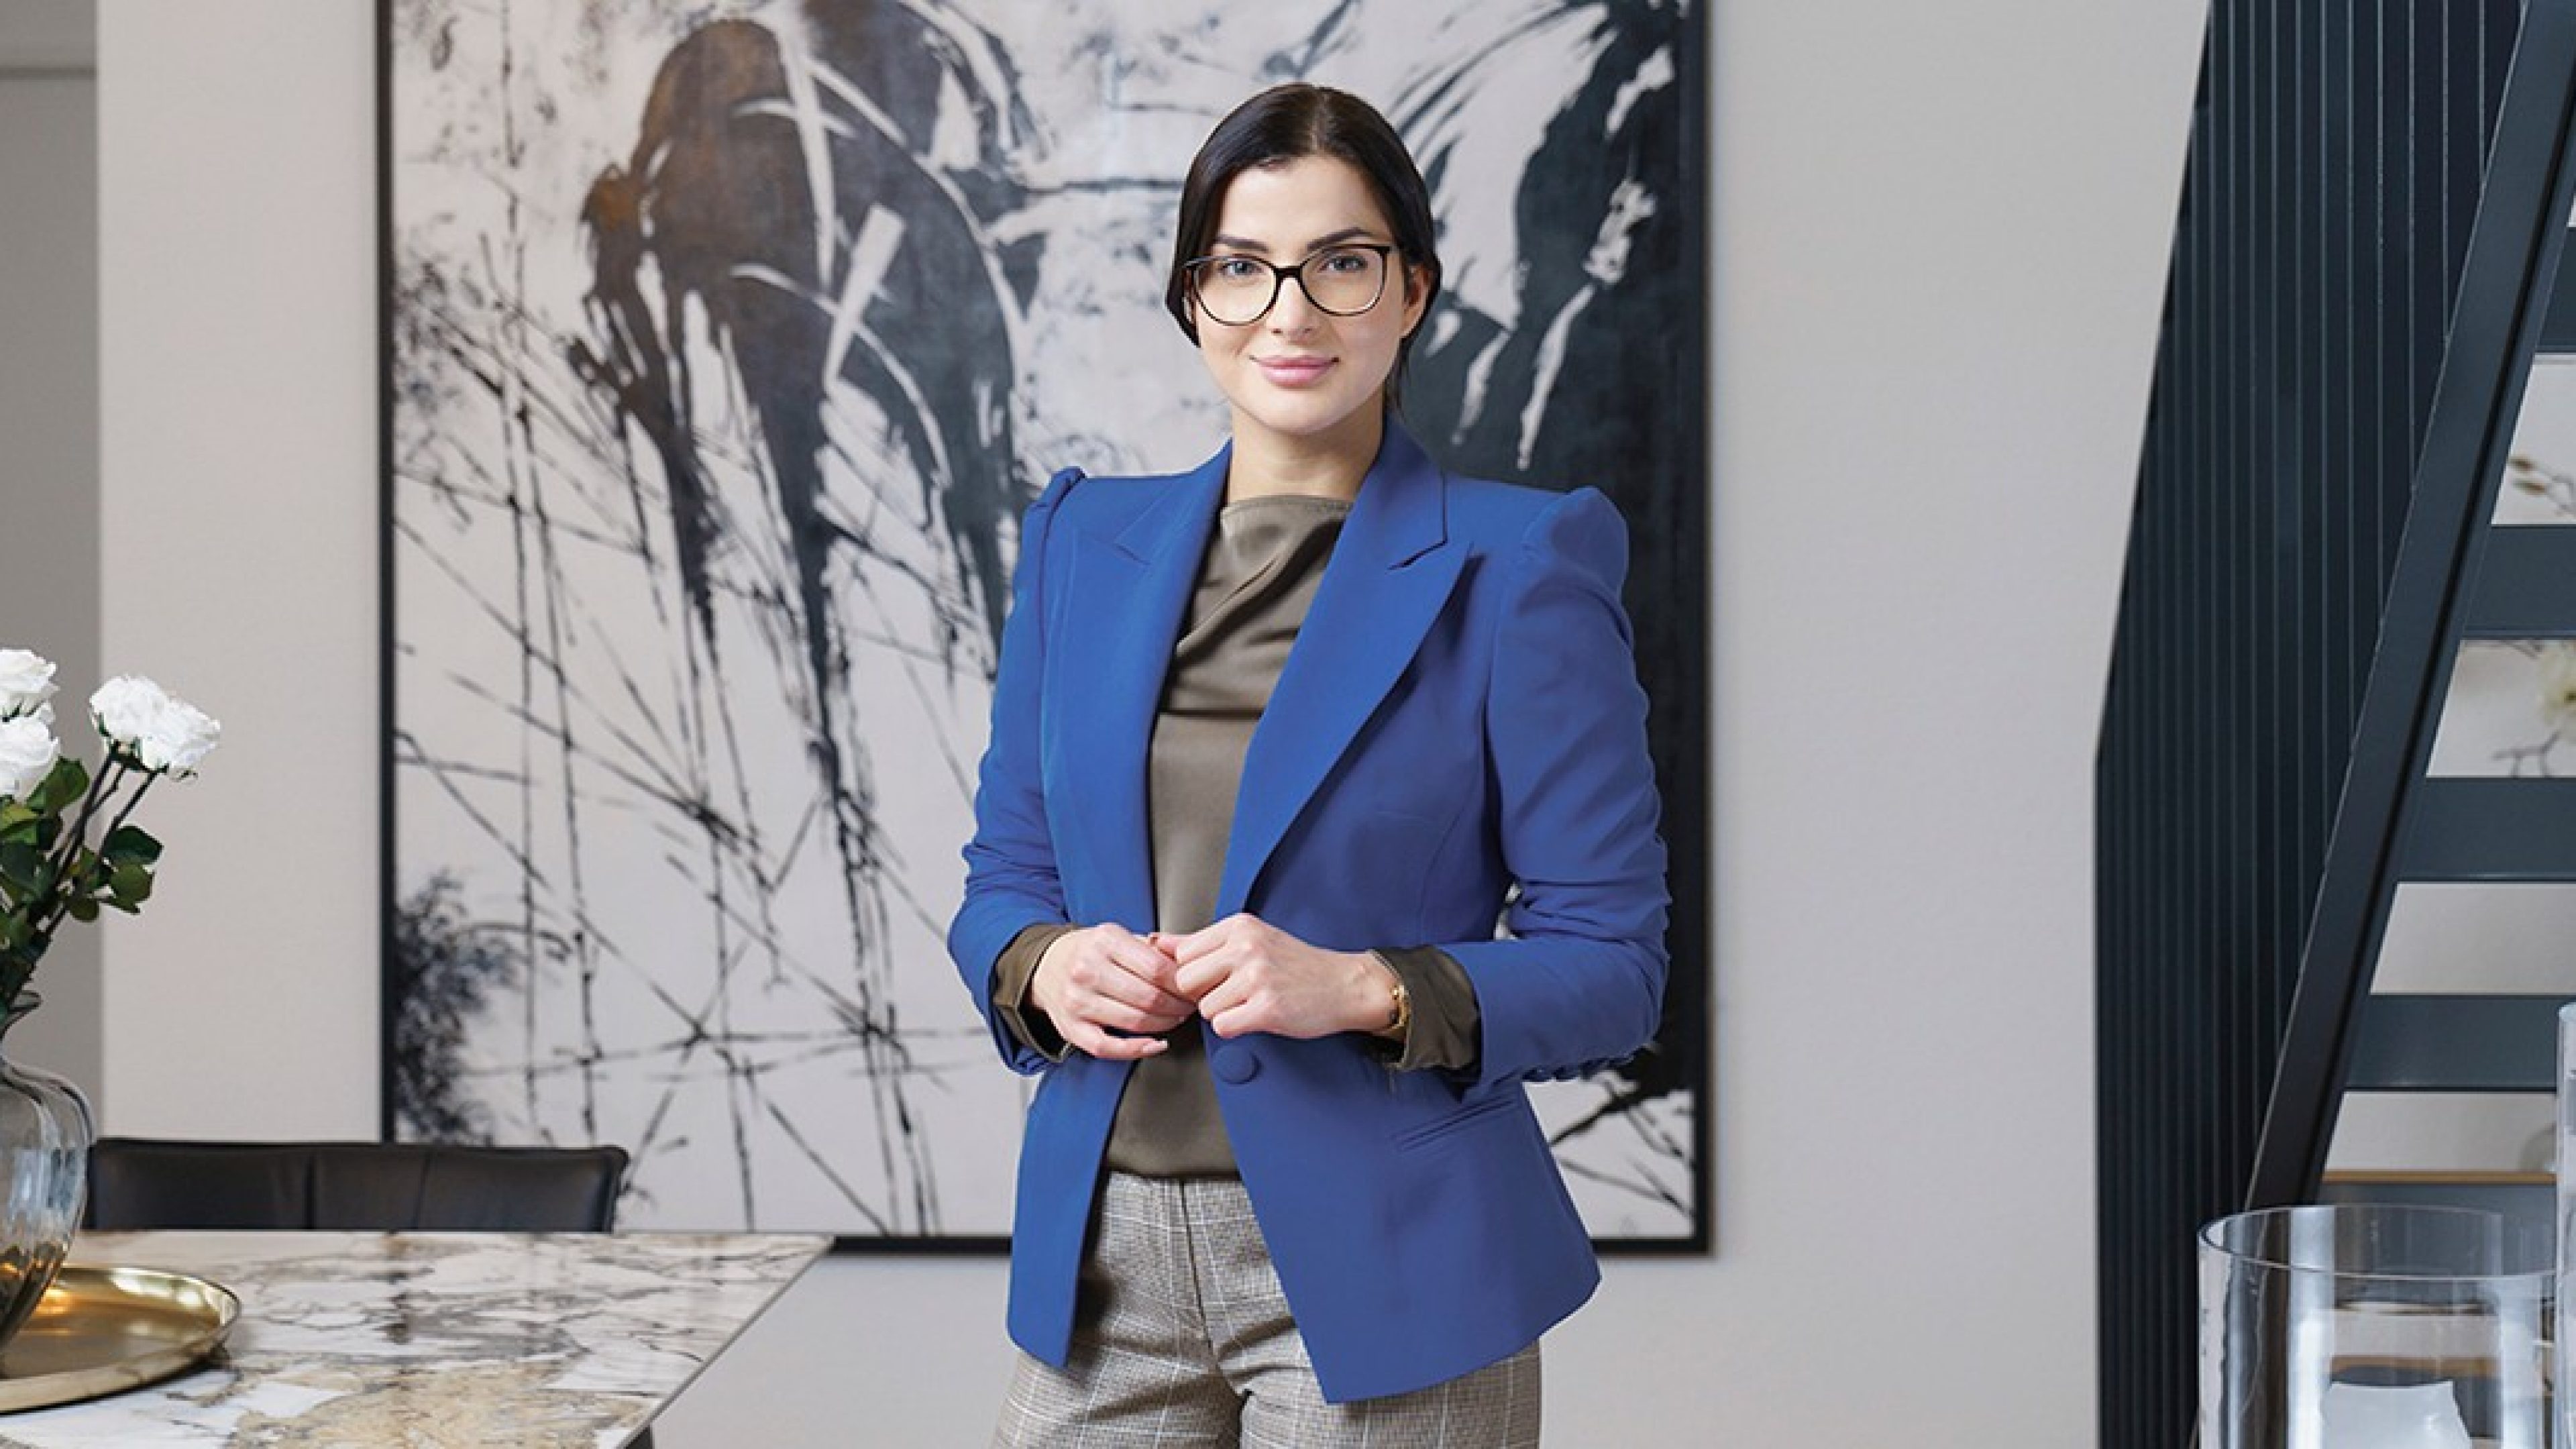 A woman wearing glasses in a business suit stands in front of a work of art and looks into the camera